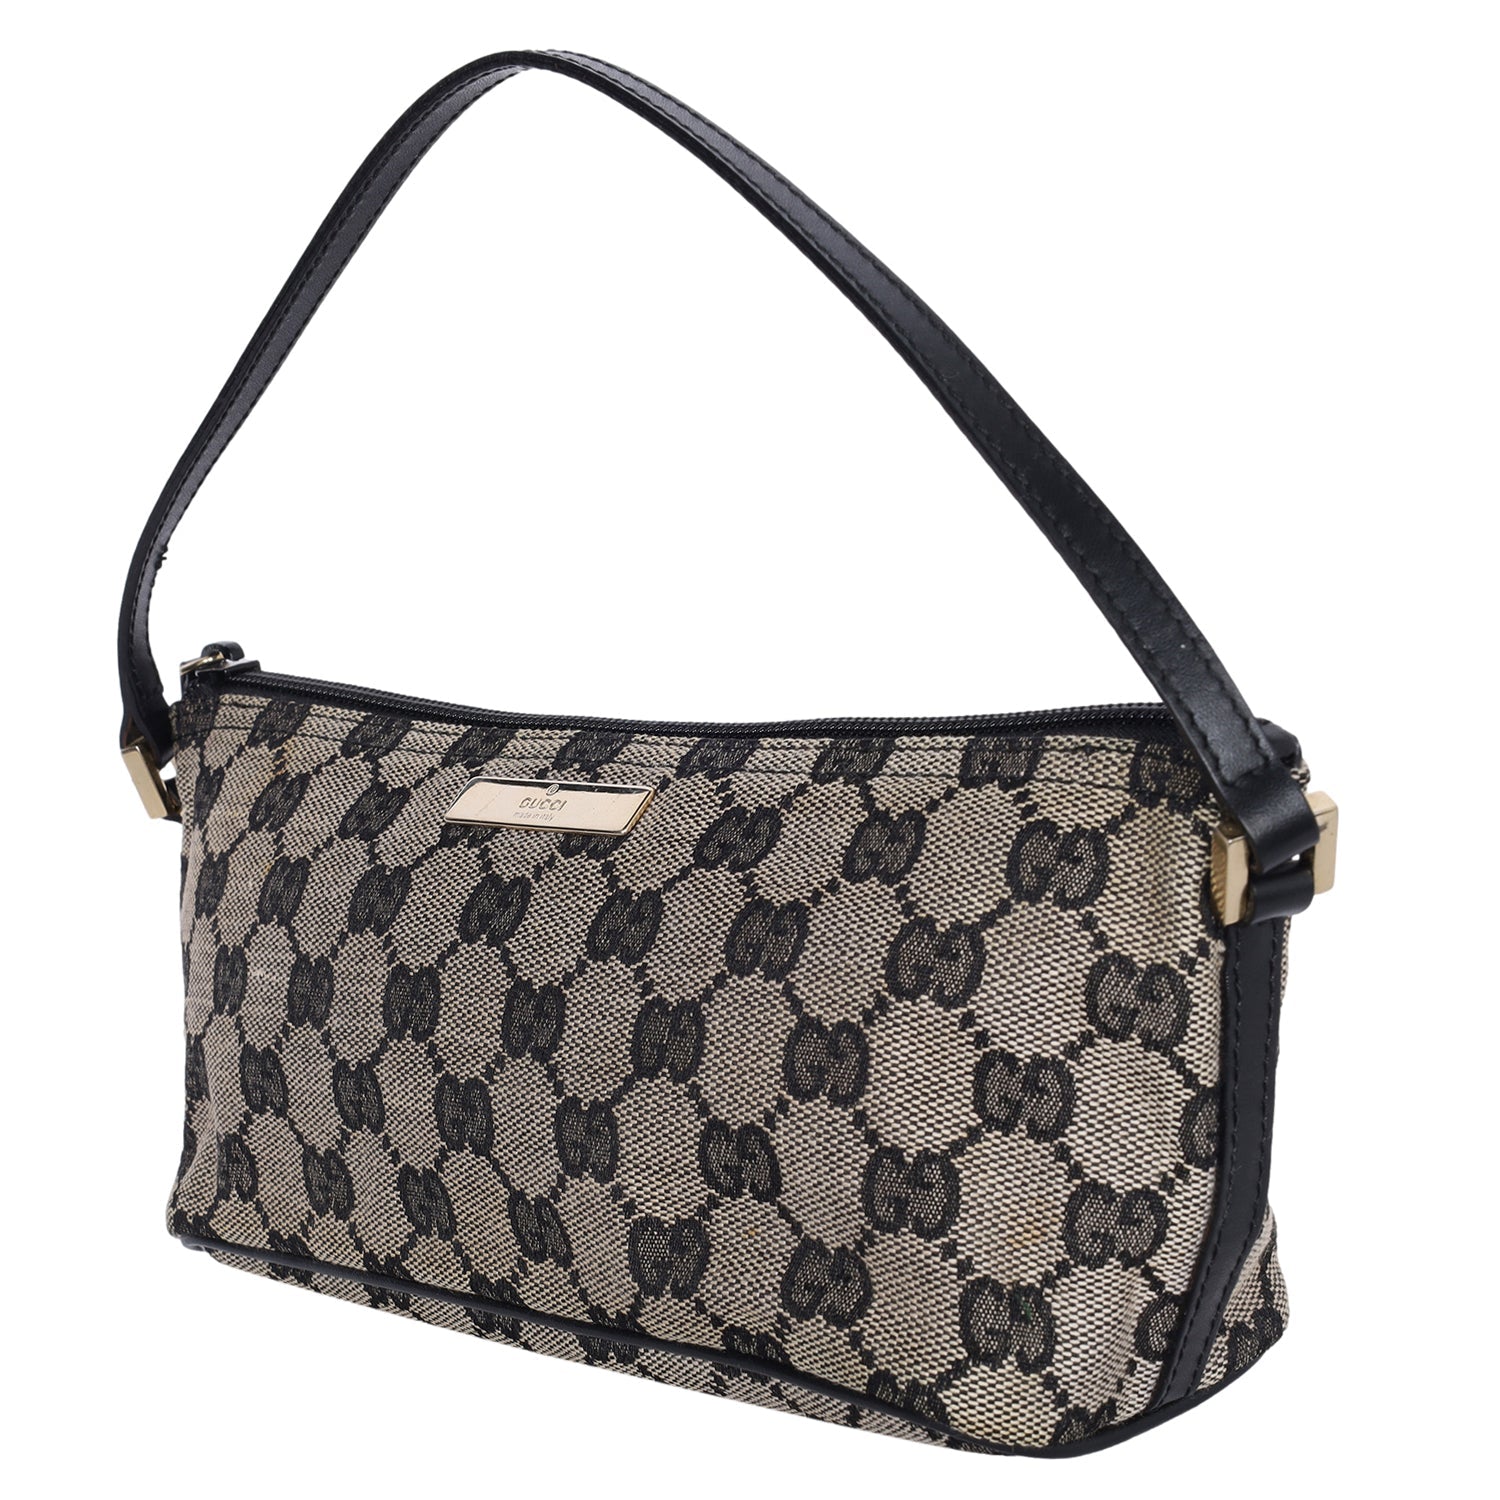 Monogram GG Canvas Pochette (Authentic Pre-Owned) – The Lady Bag